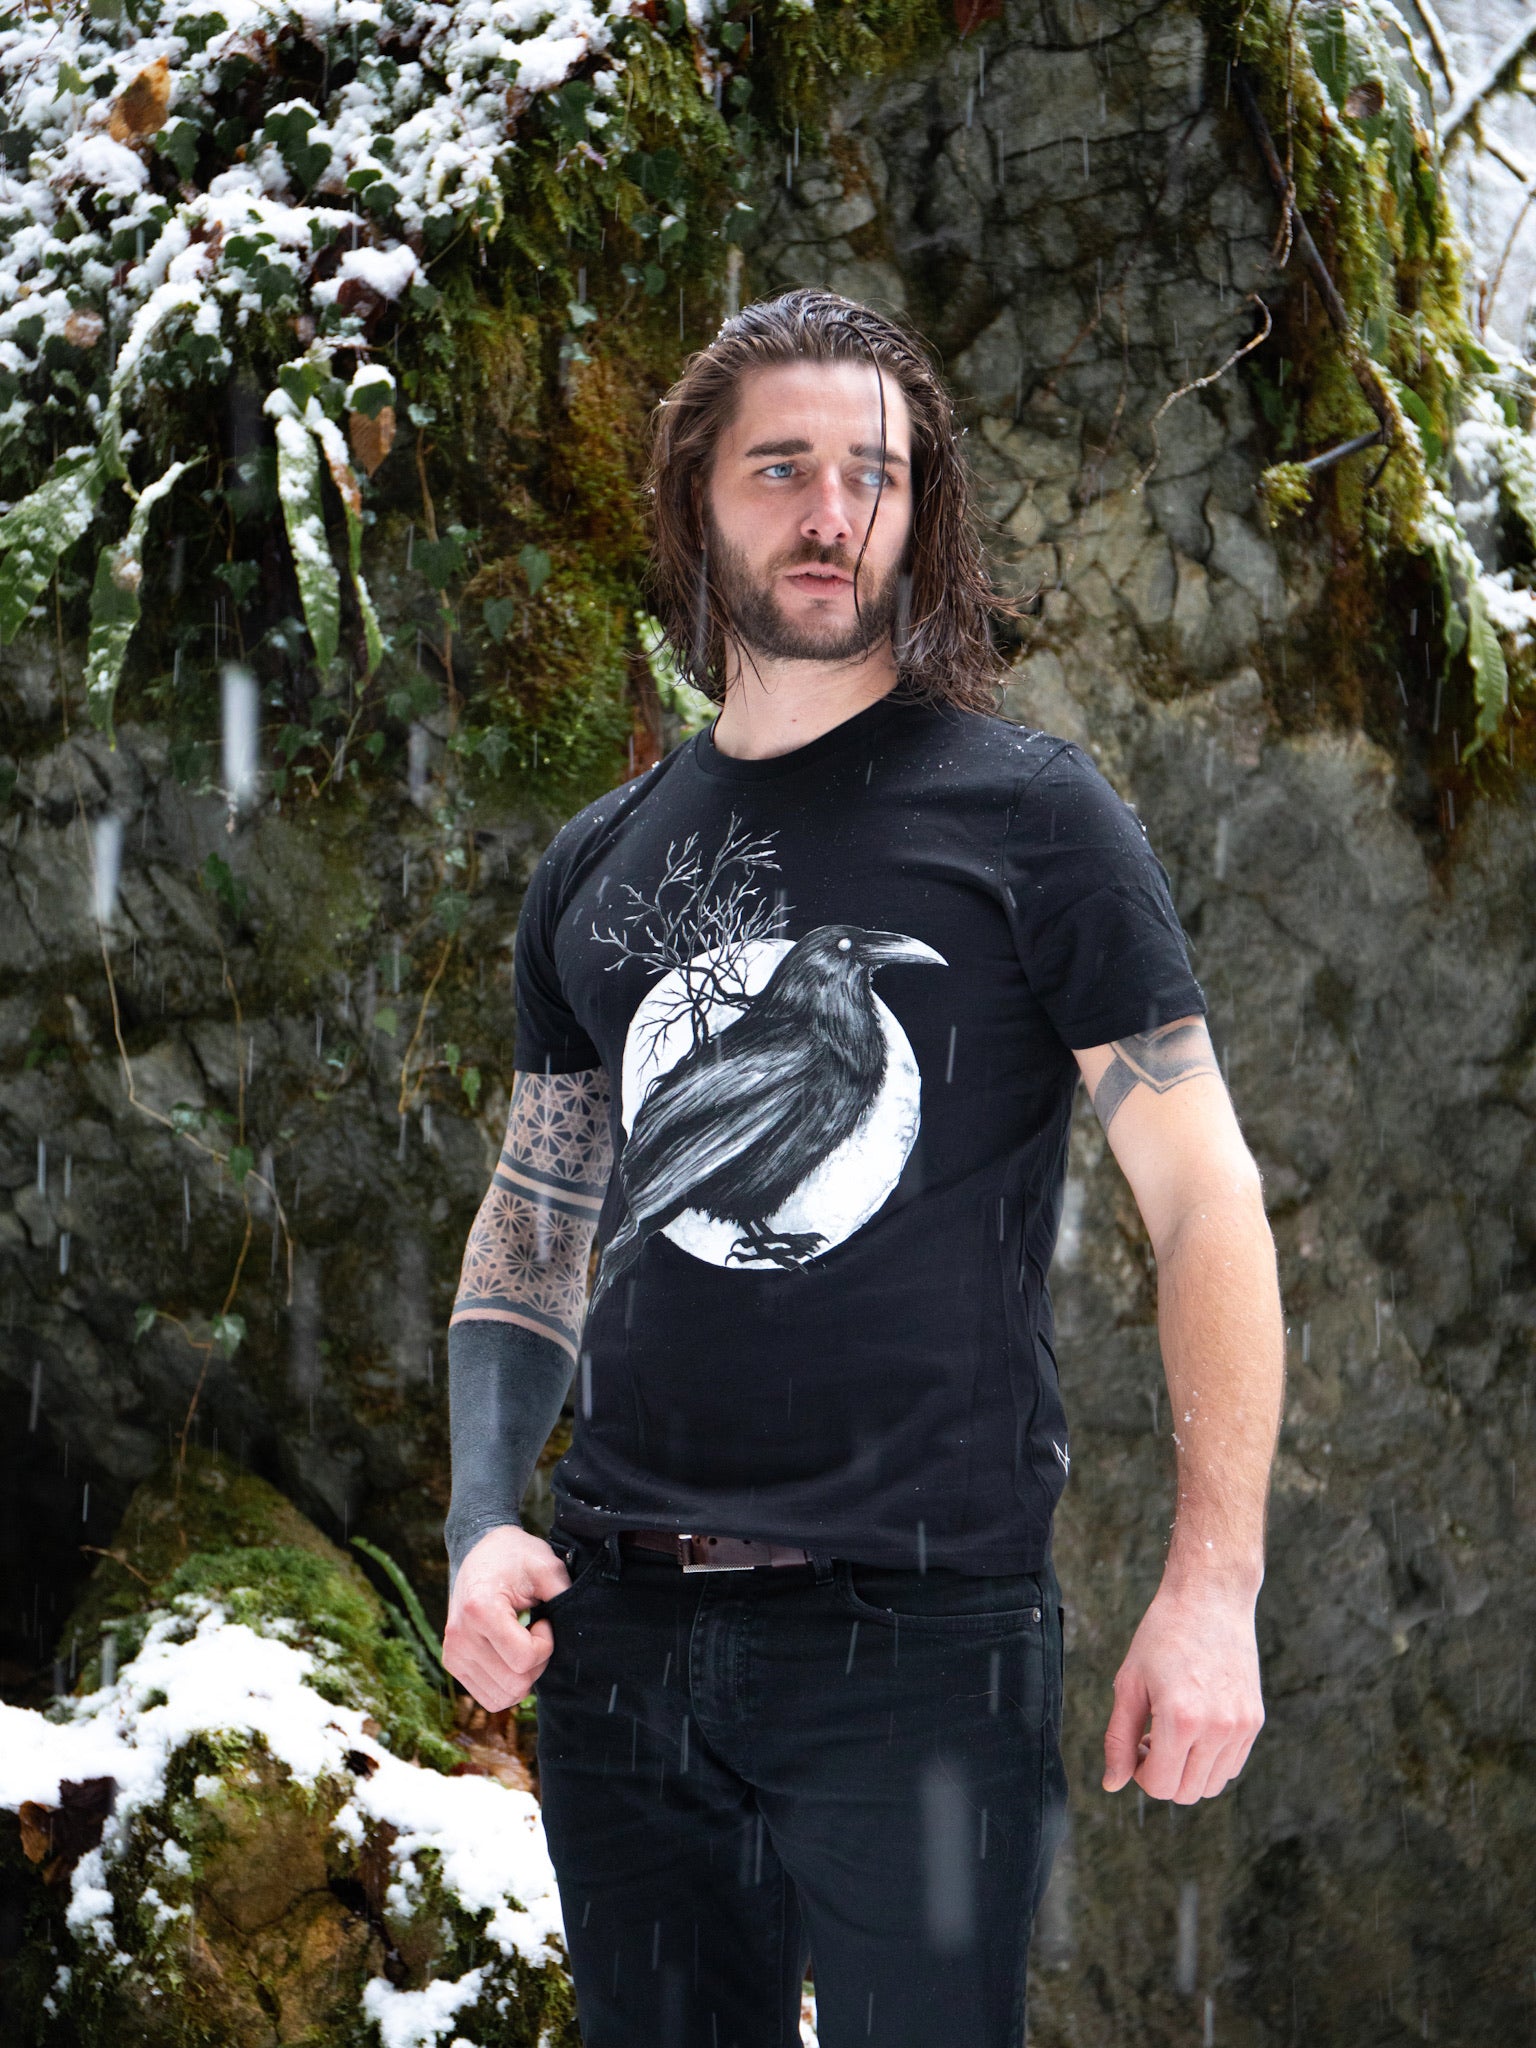 Hrafn, Mani, Descended from Odin, Organic T-shirts, Staithes Hoodie, Merino Wool Hoodie, Odin, TYR, Thor, Ragnar, Bjorn Ironside, Vikings, Anglo Saxon, Norse, Fitness Gear, Horns, Jewellery, Silver